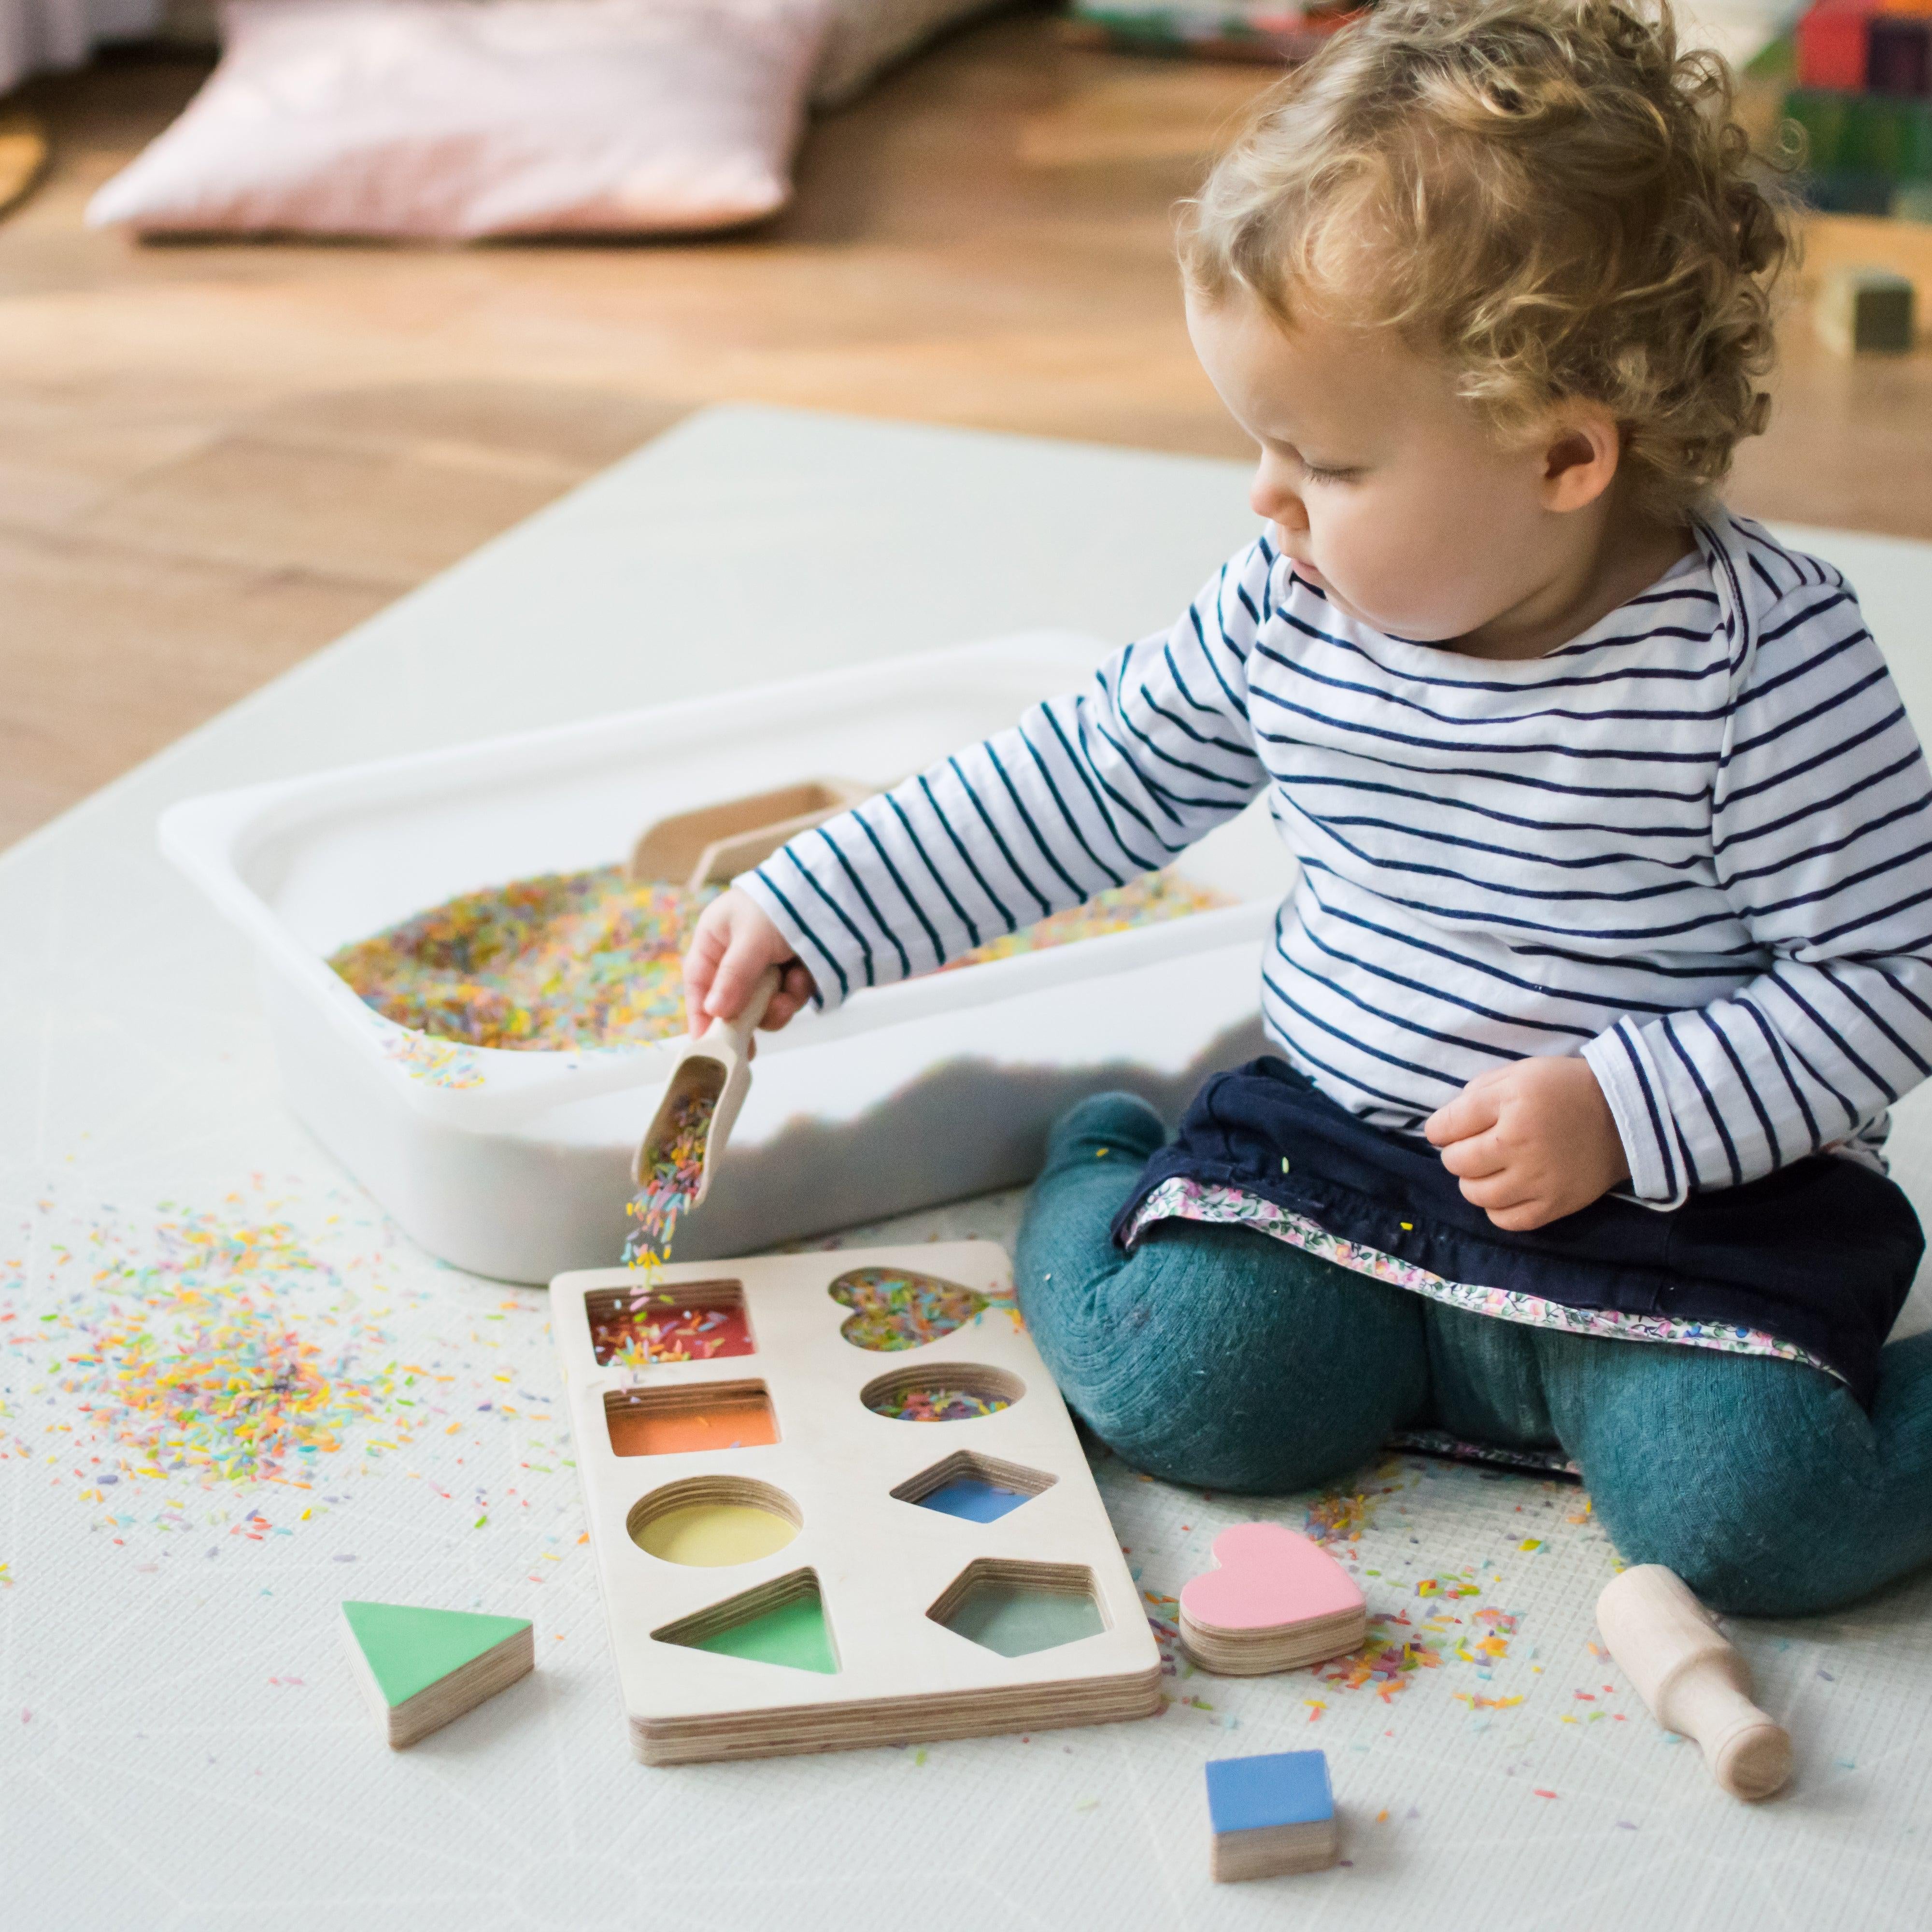 All You Need To Know About Sensory Play Equipment